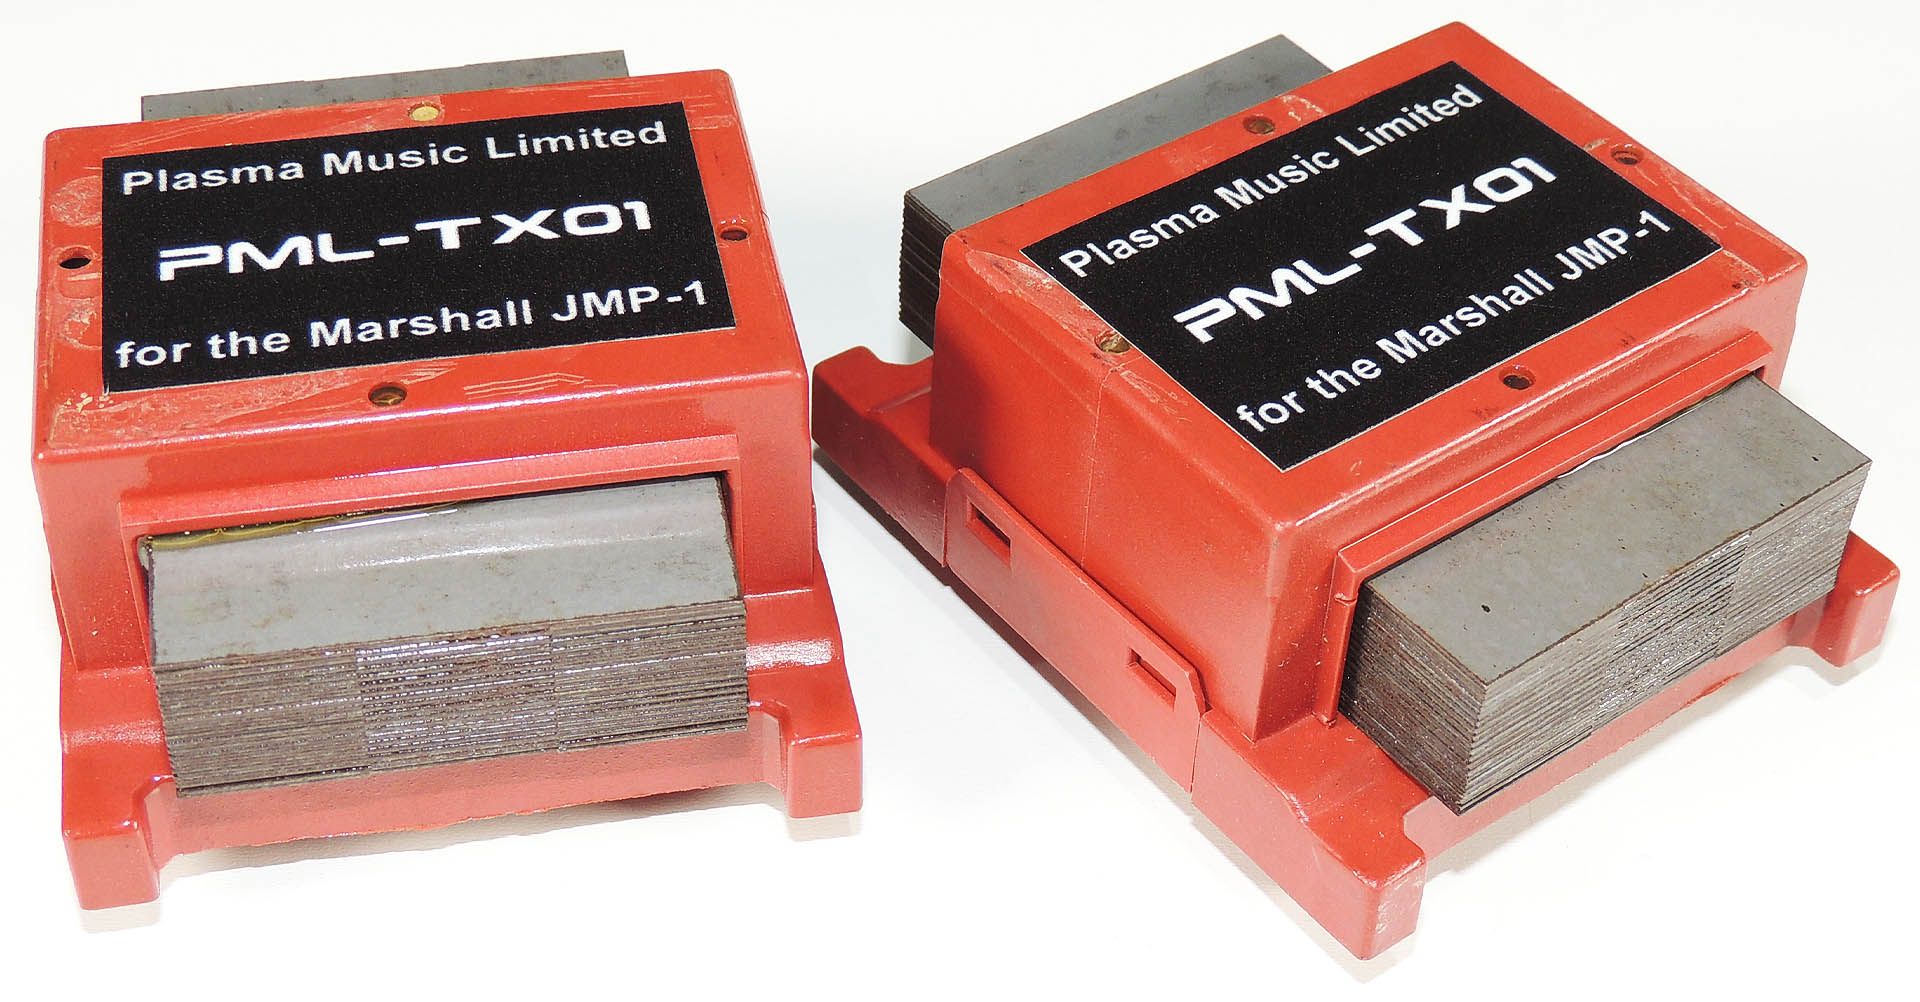 PML-TX01 replacement transformer for the Marshall JMP-1